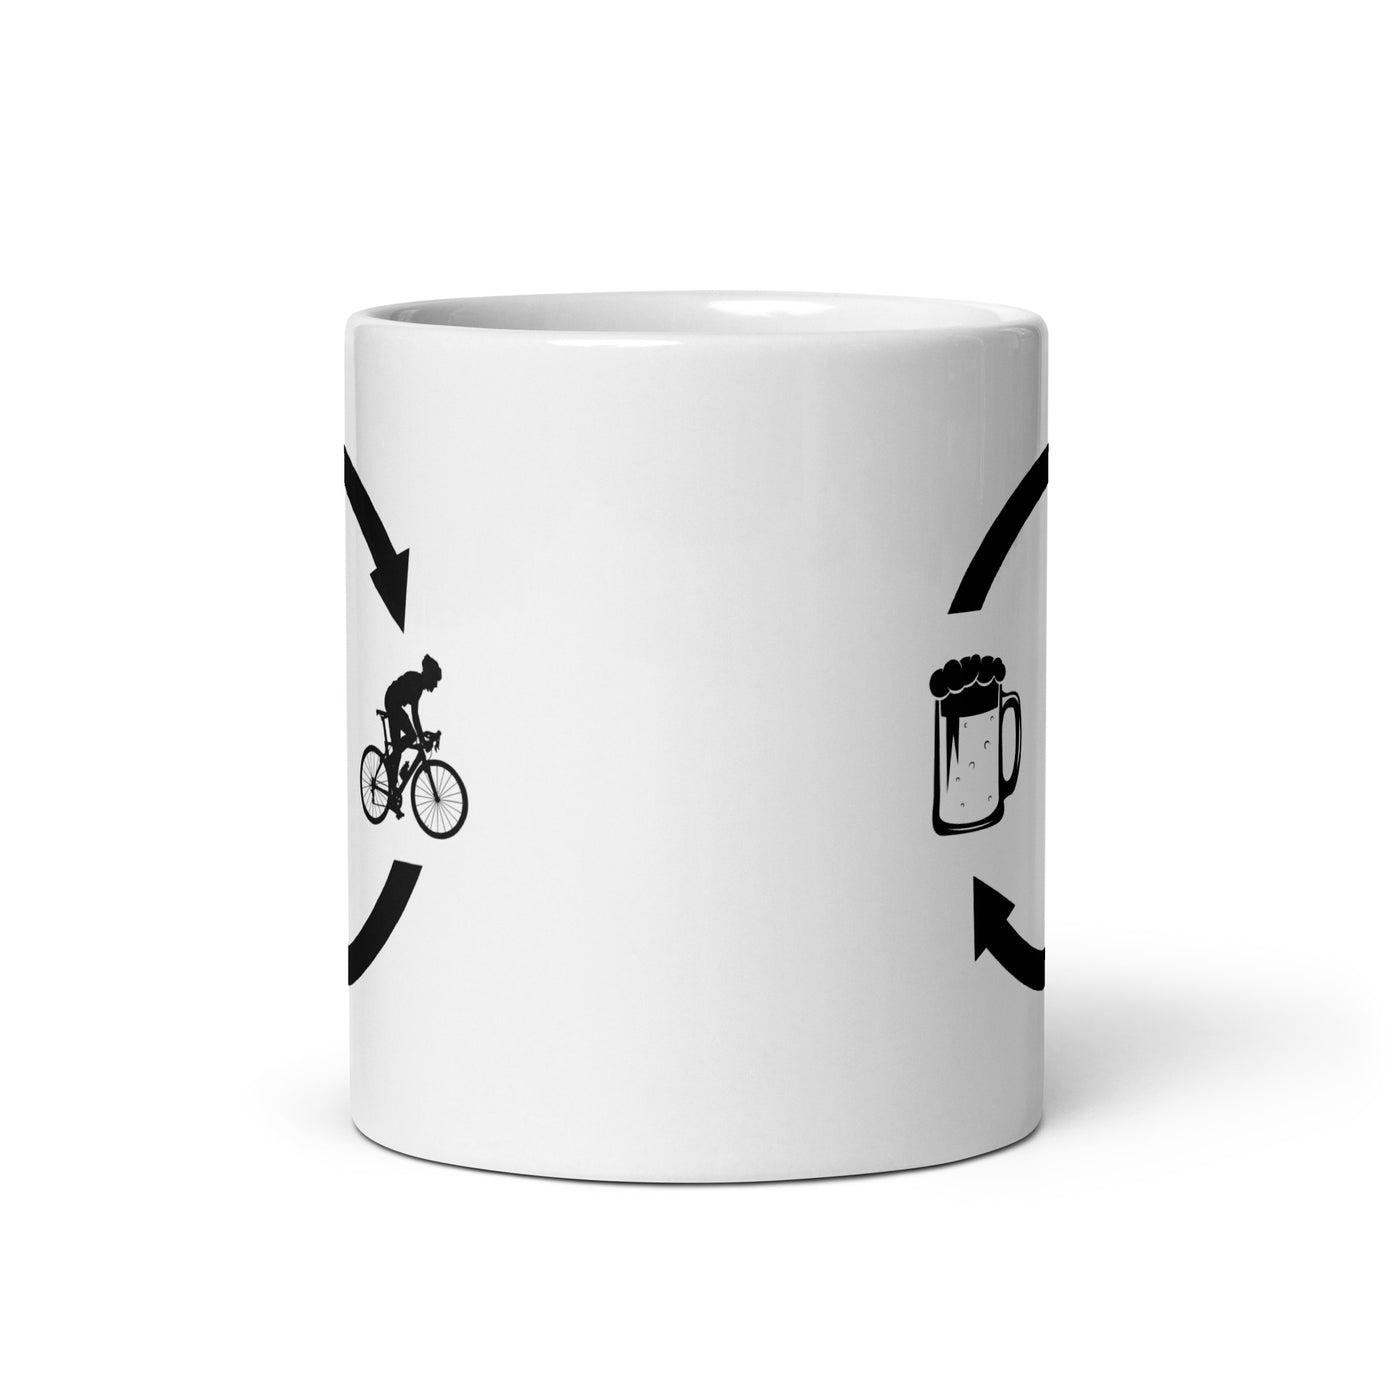 Beer Loading Arrows And Cycling 1 - Tasse fahrrad